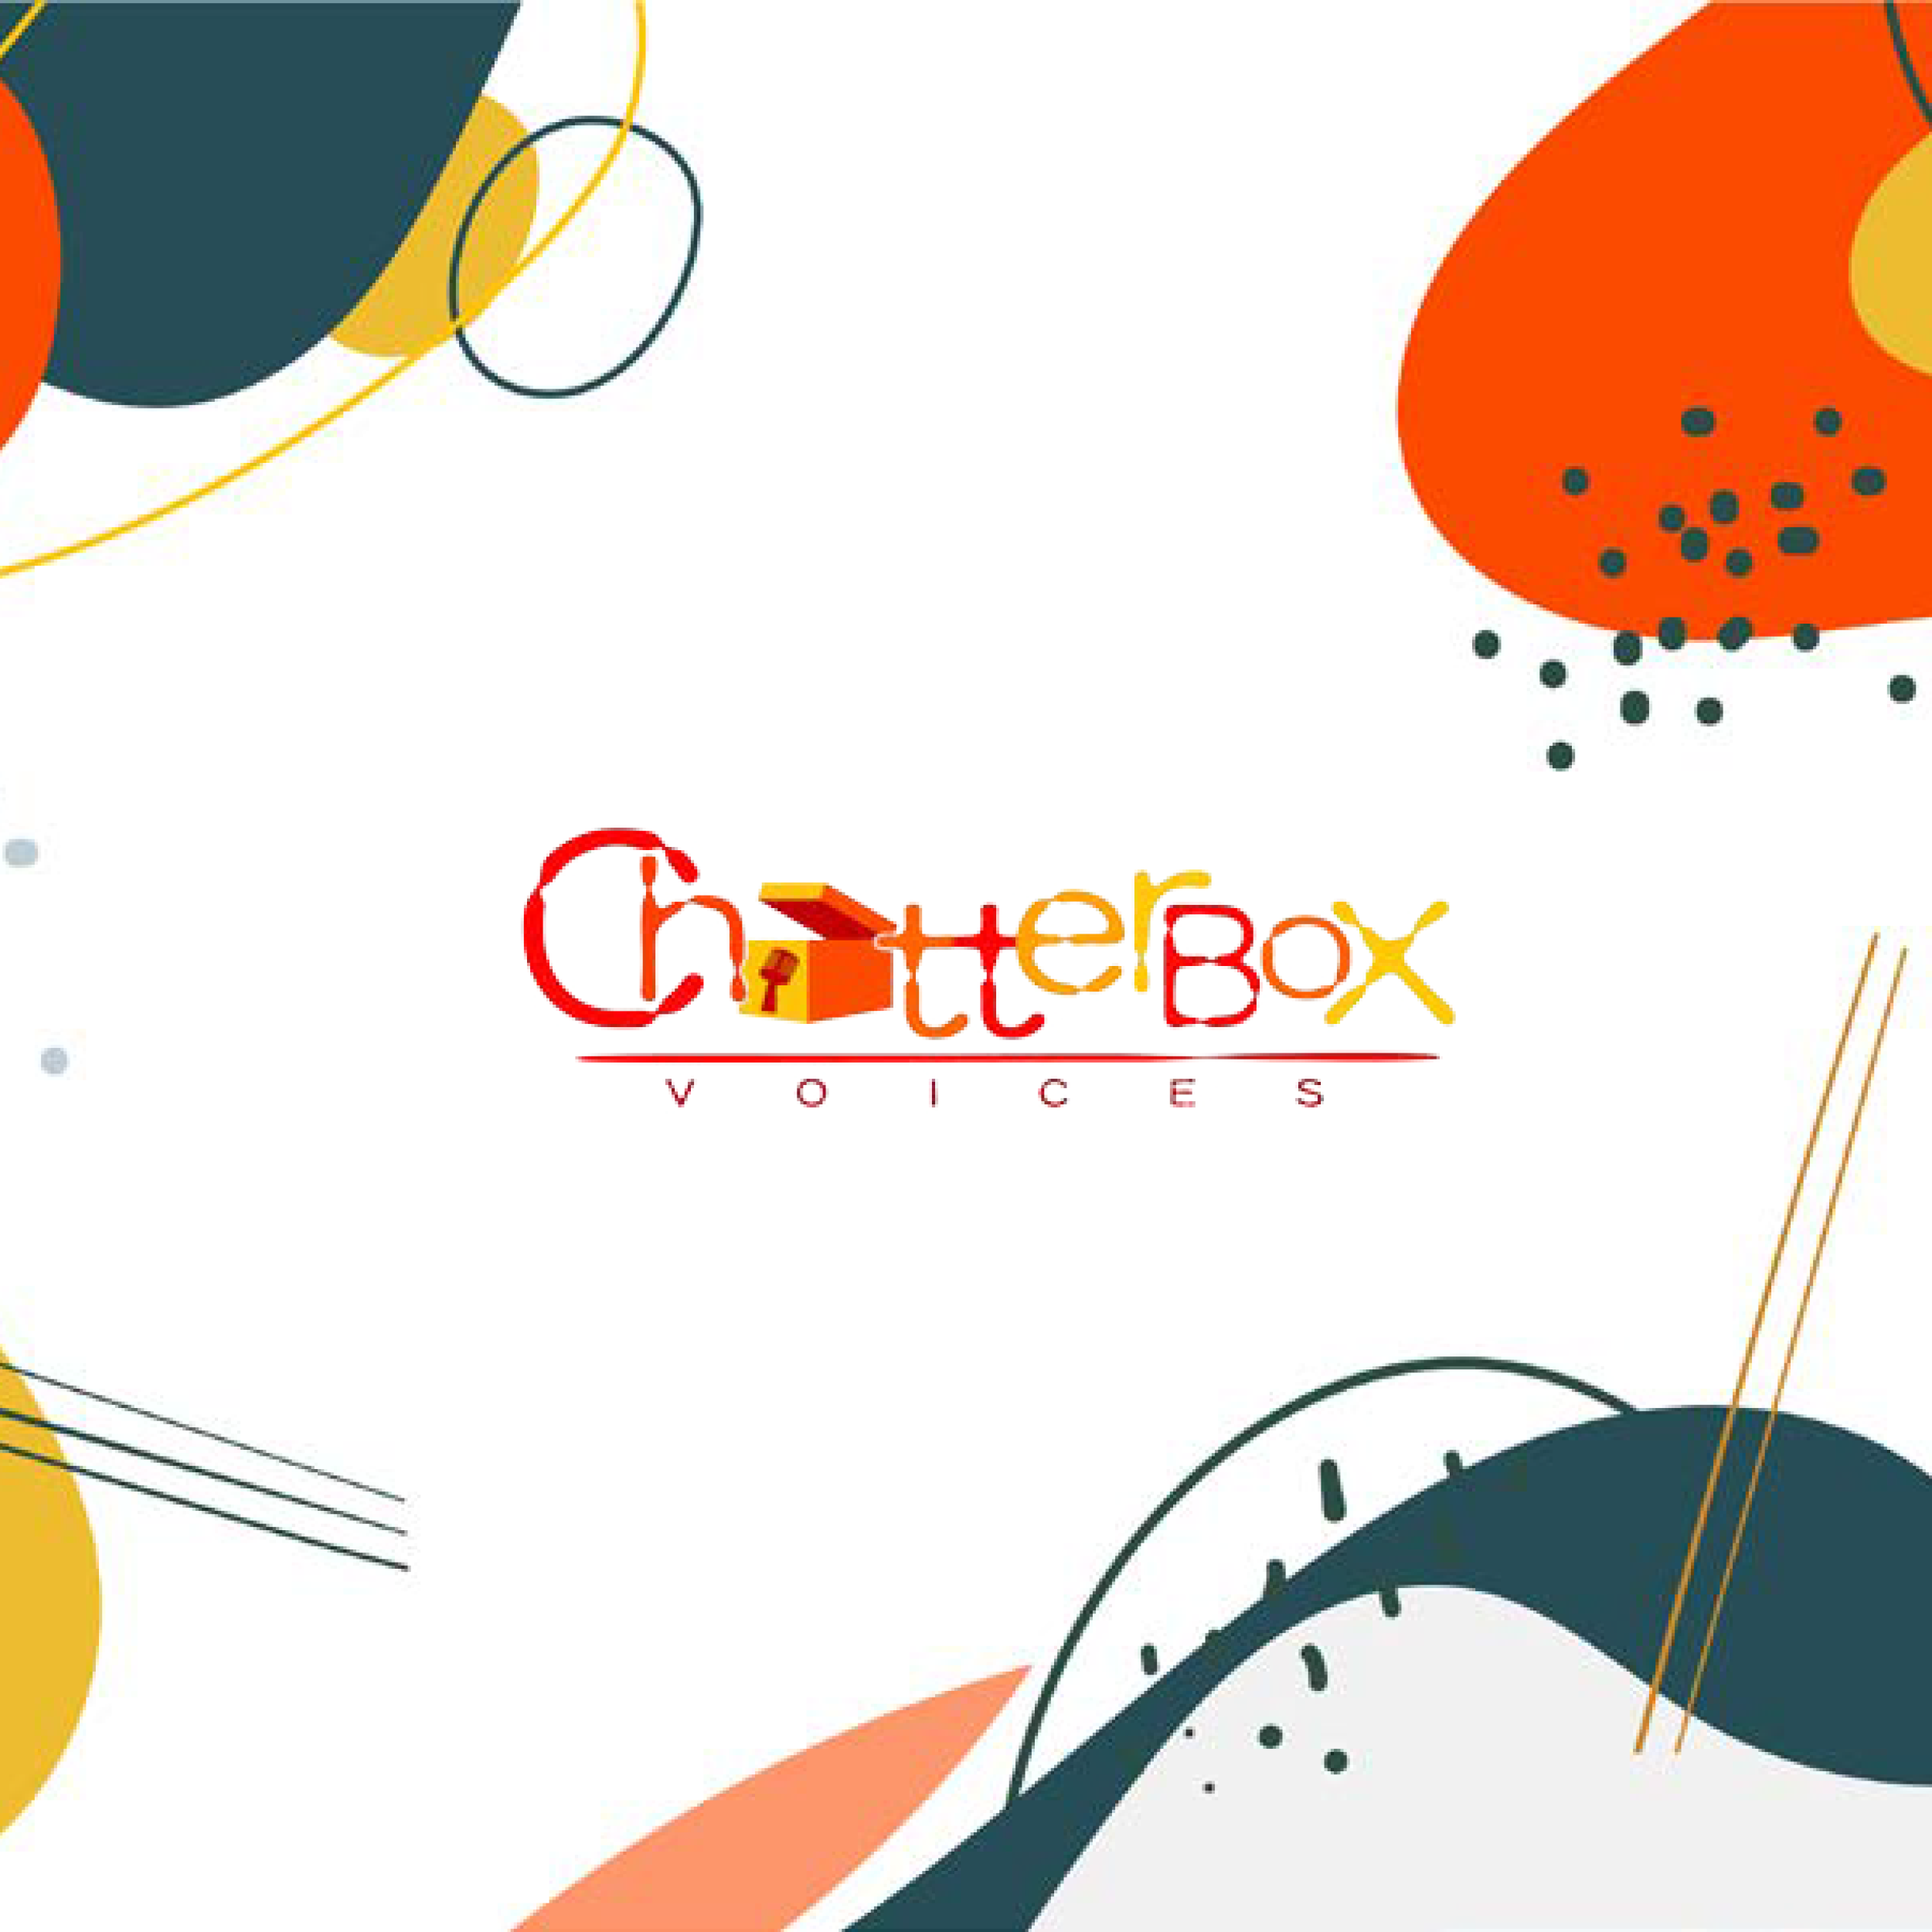 ChatterboxProfile